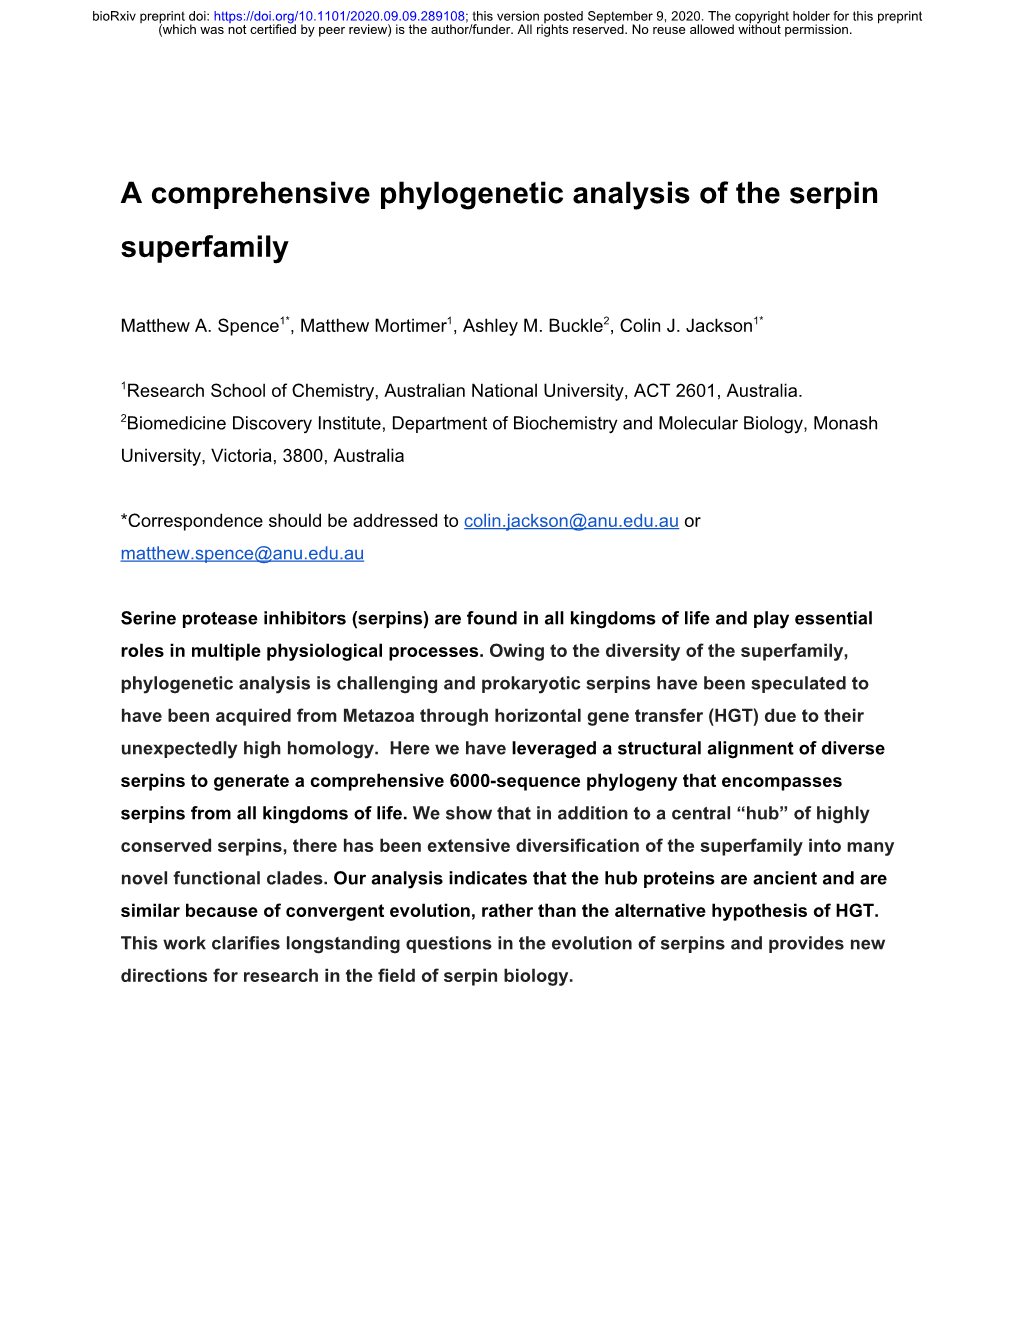 A Comprehensive Phylogenetic Analysis of the Serpin Superfamily